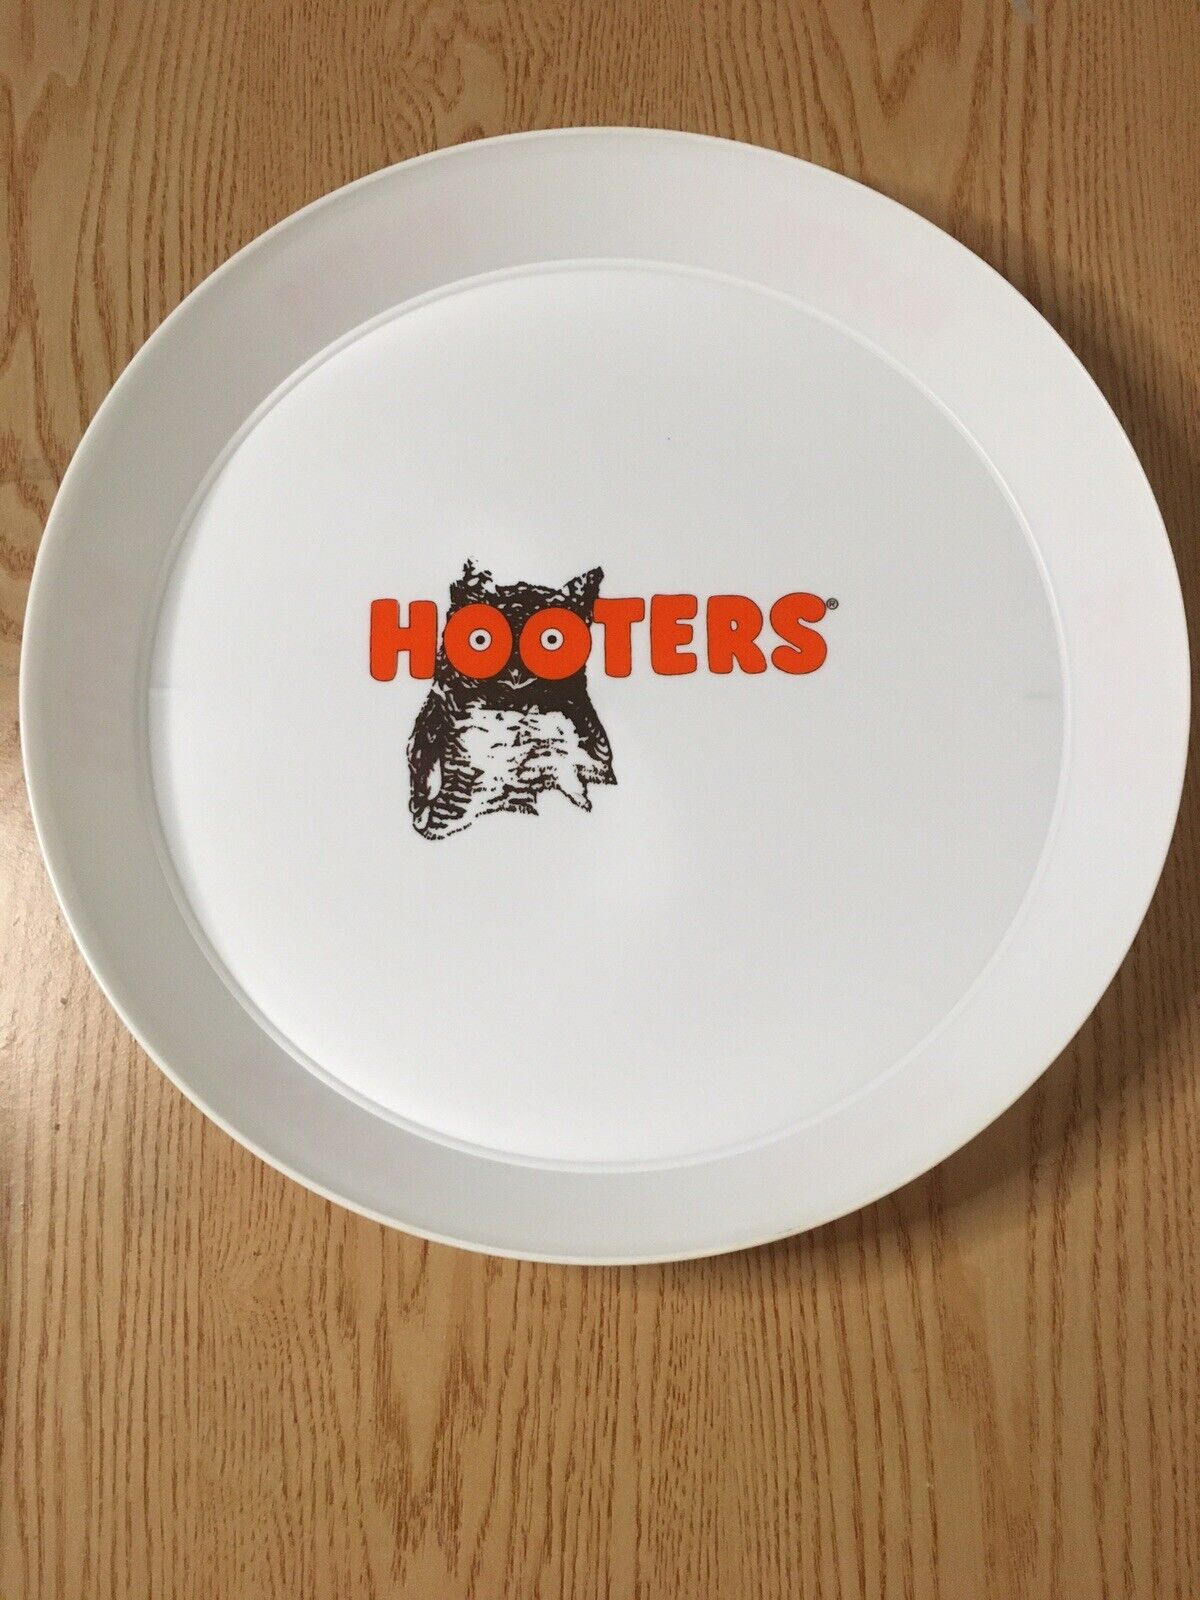 New Hooters Girl Server Vintage Clams Food Drinks Tray 13.1/4”x2” Hard Plastic